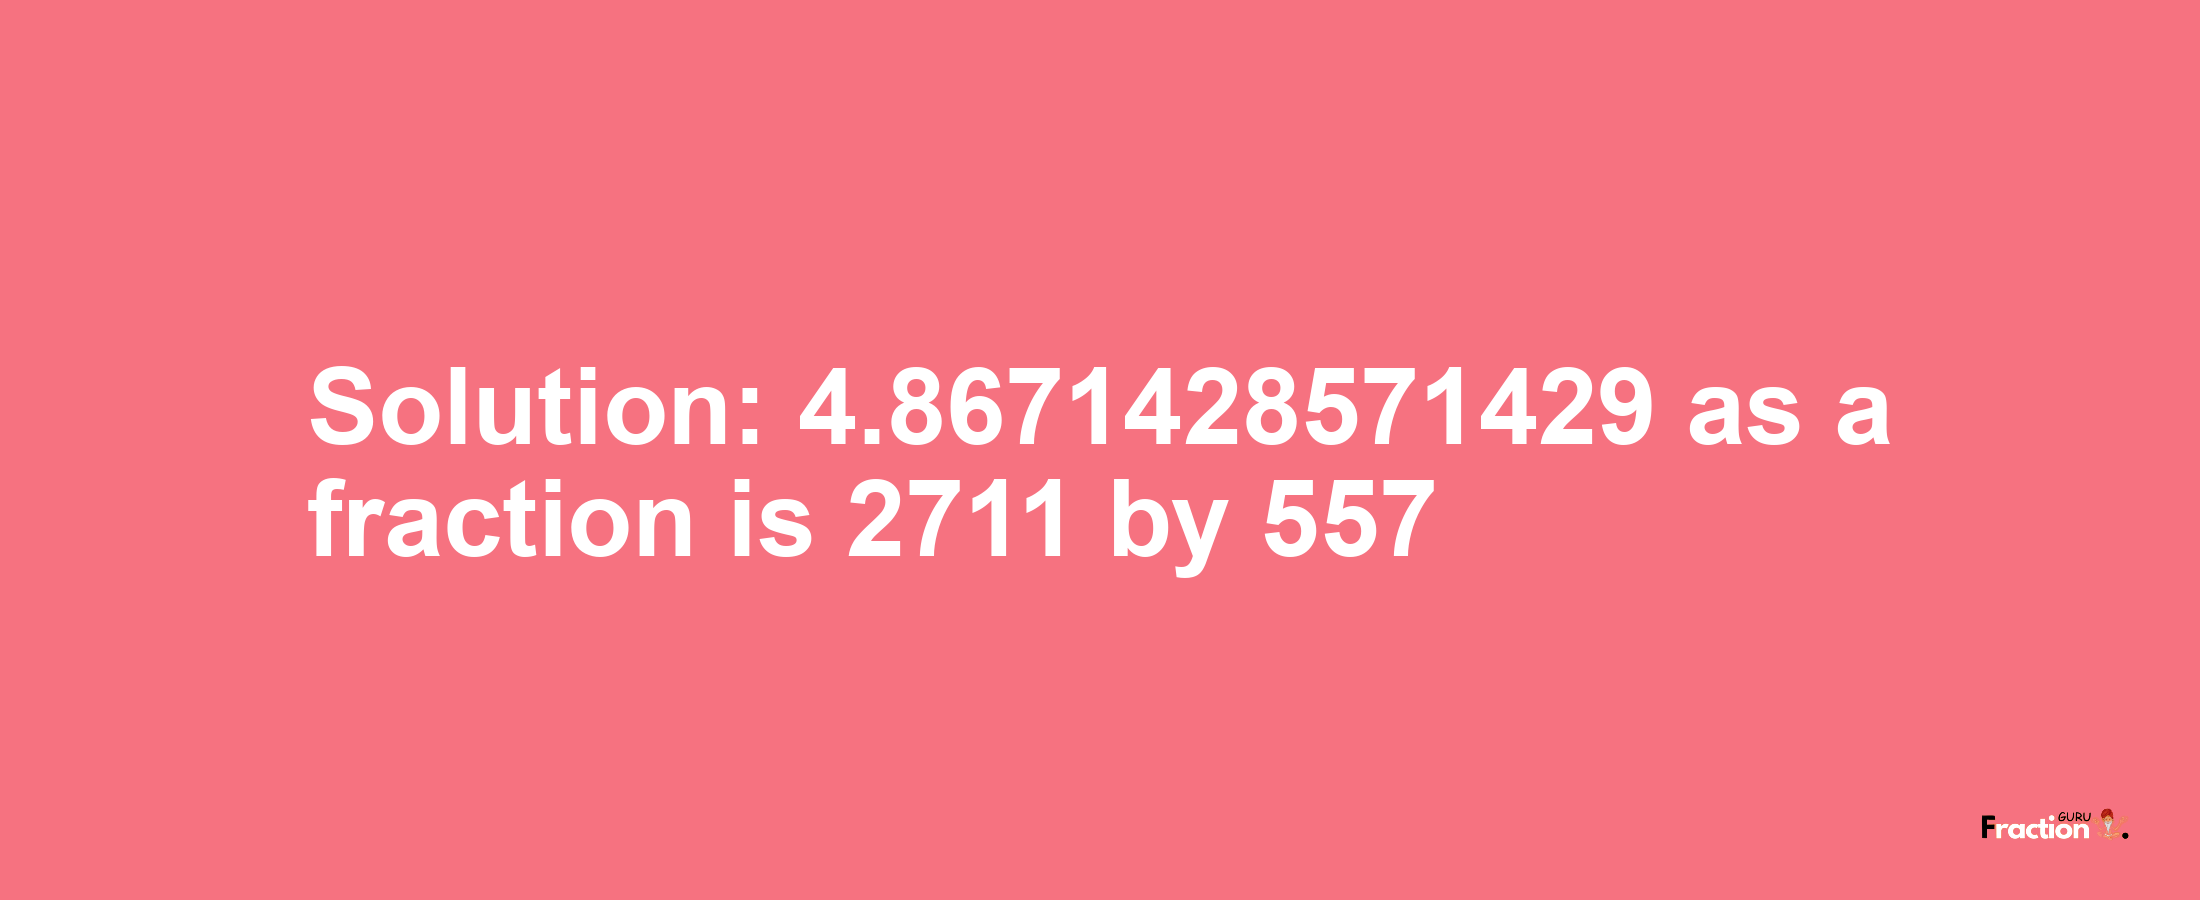 Solution:4.8671428571429 as a fraction is 2711/557